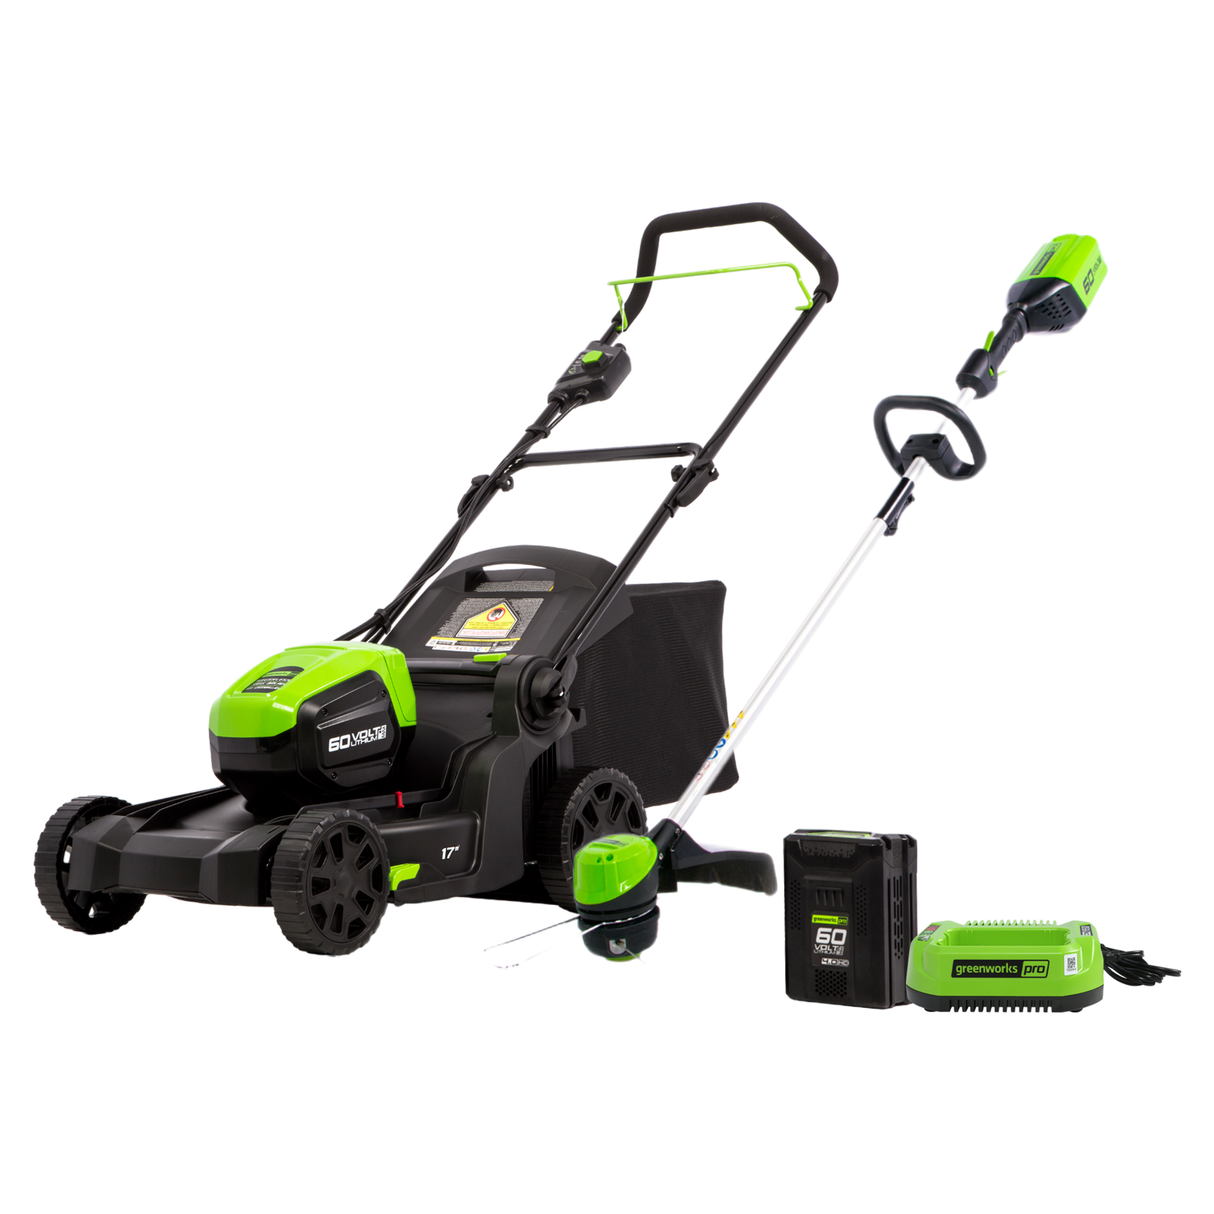 60V 17" Lawn Mower & 60V 13" String Trimmer Combo Kit, 4.0Ah Battery and Charger Included